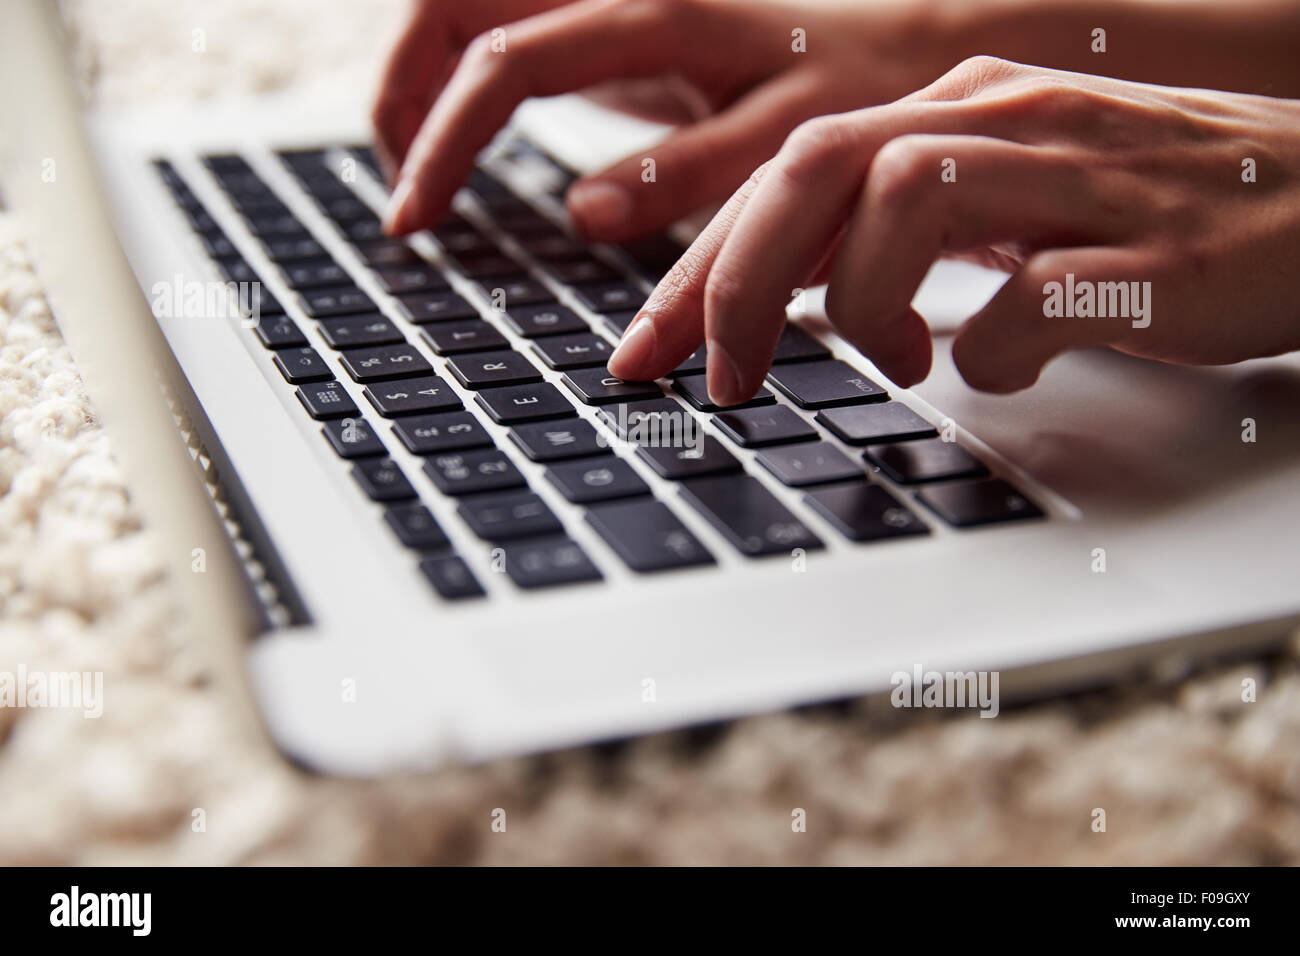 Close up of person’s hands using a laptop computer Stock Photo